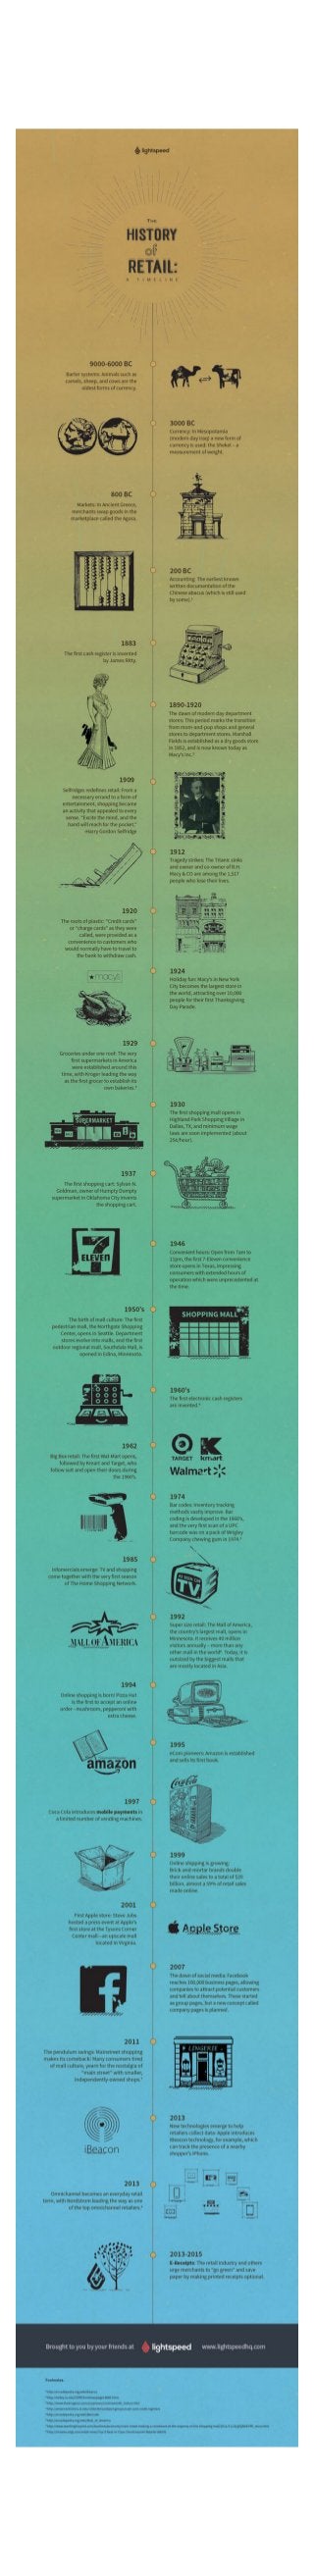 The History of Retail: A Timeline